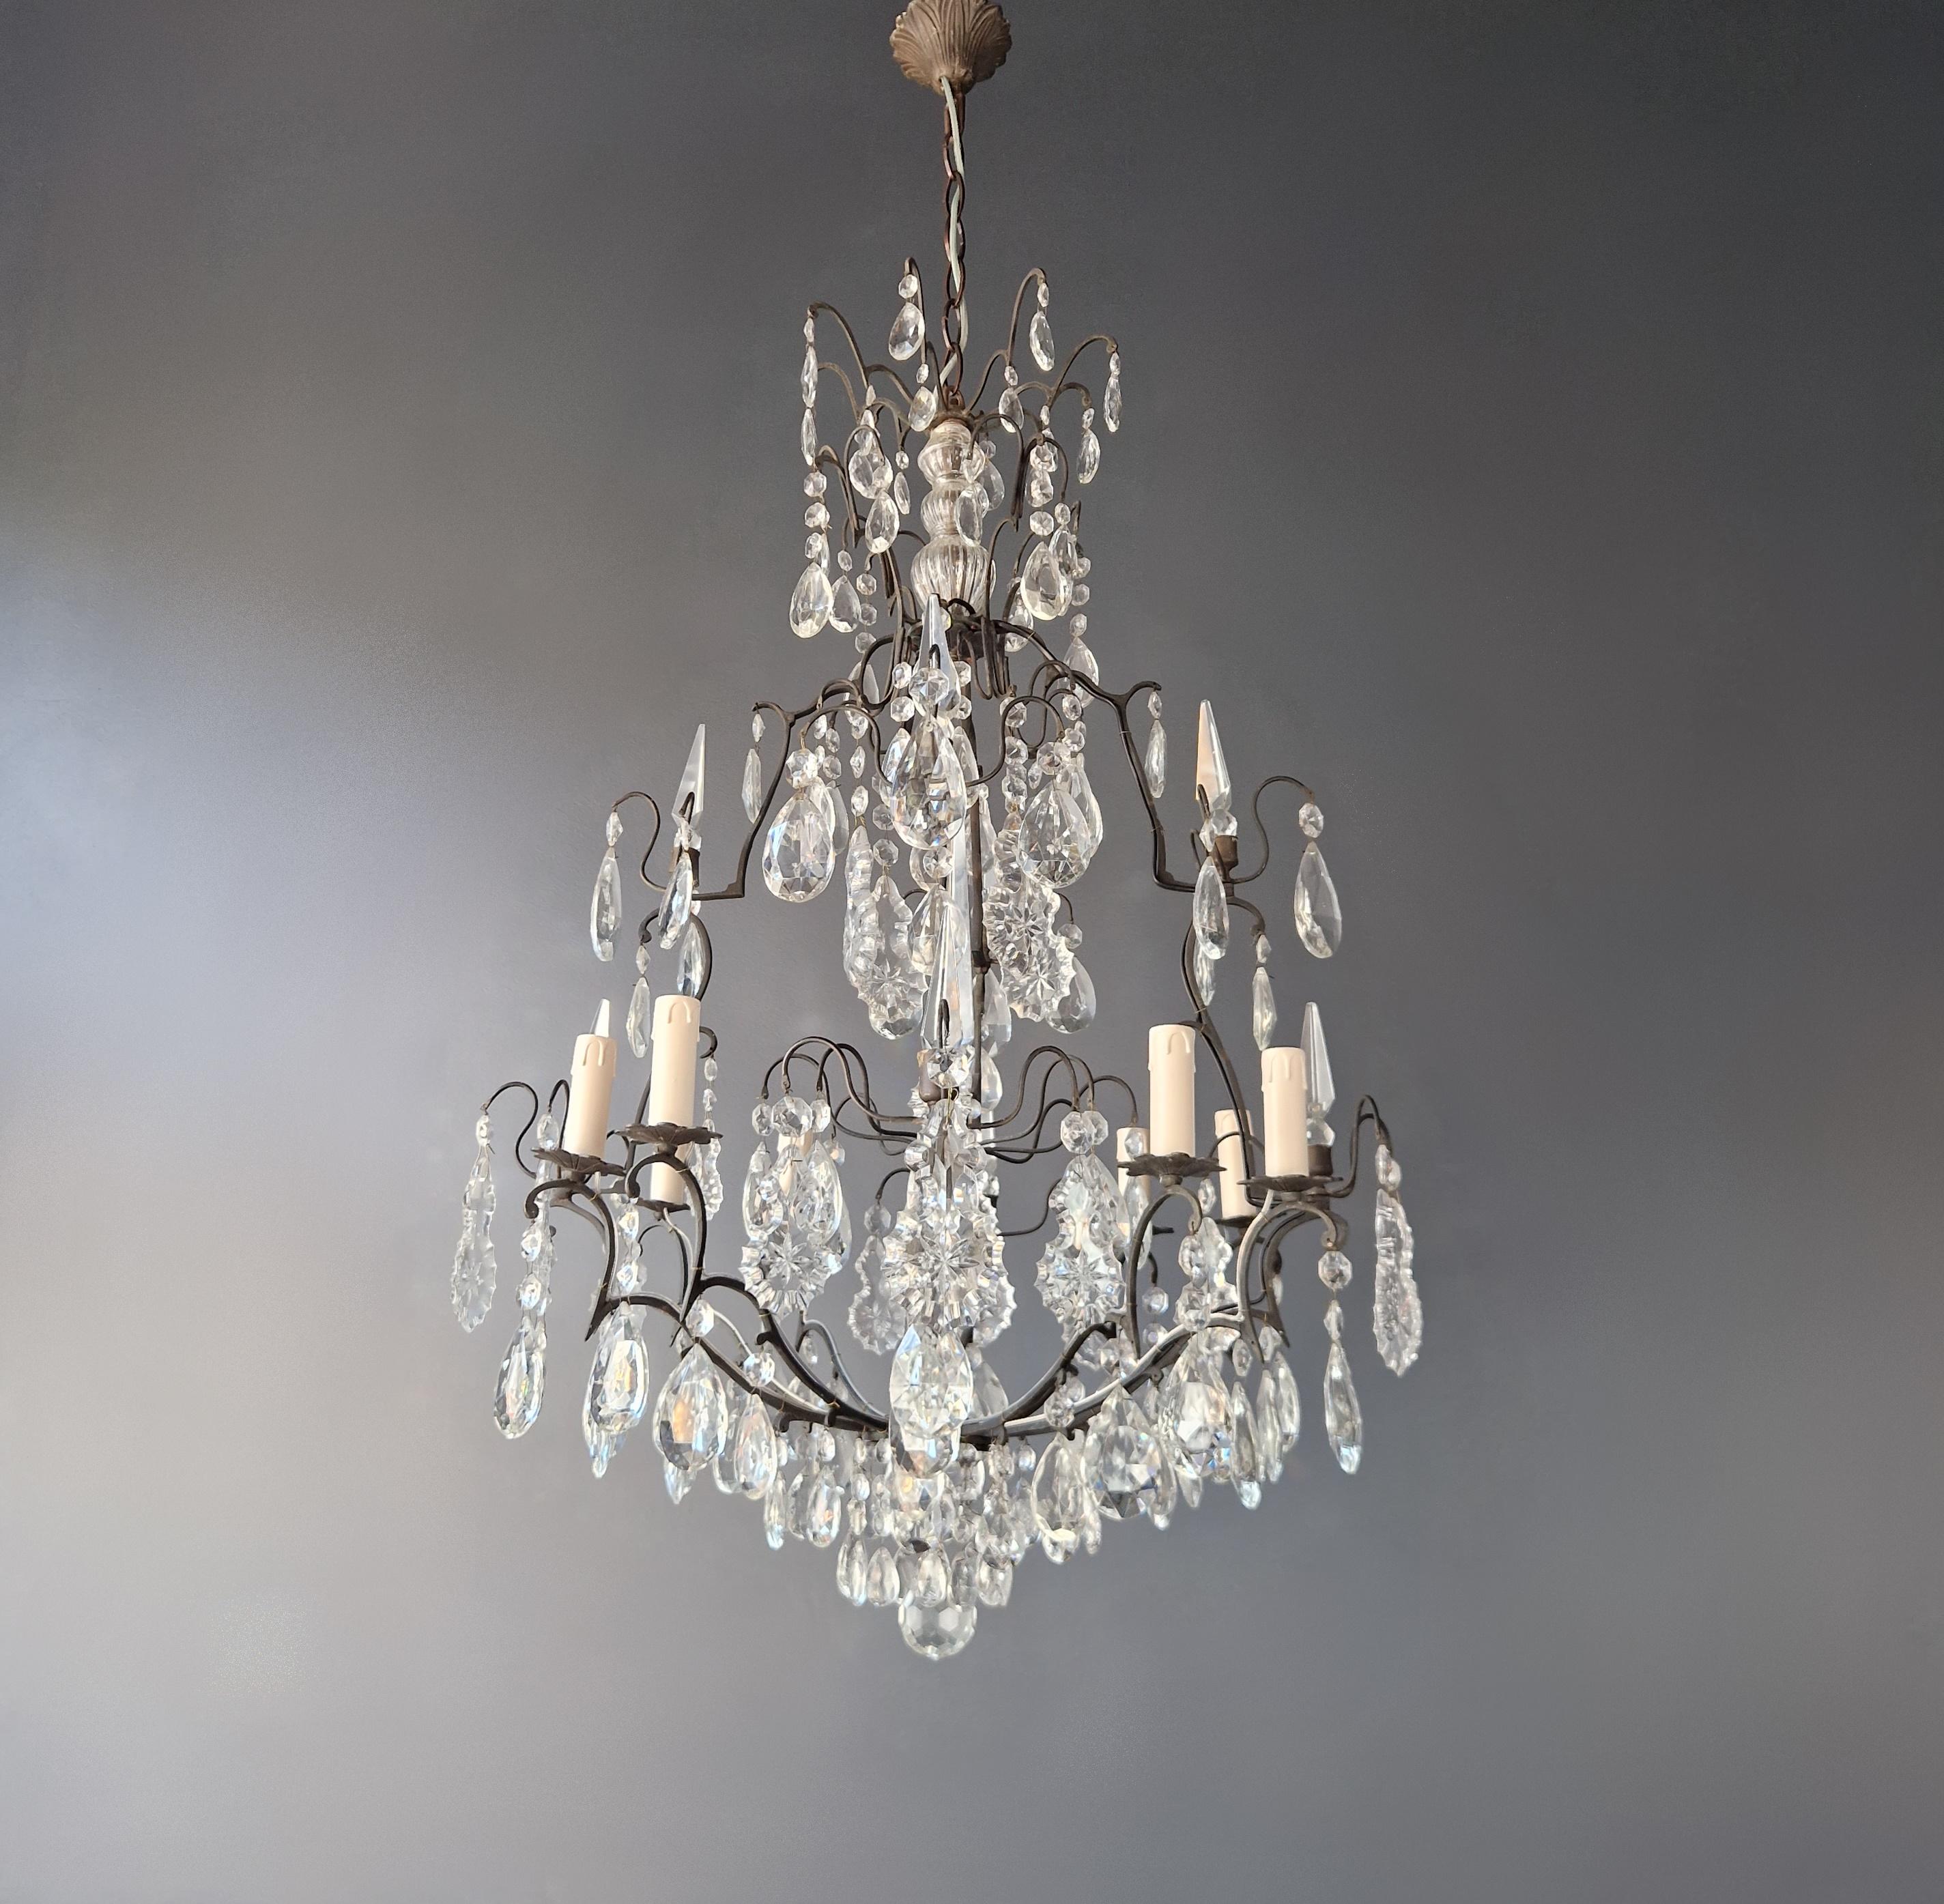 Hand-Knotted Antique French Crystal Chandelier Ceiling Lamp Lustre Art Nouveau Lamp